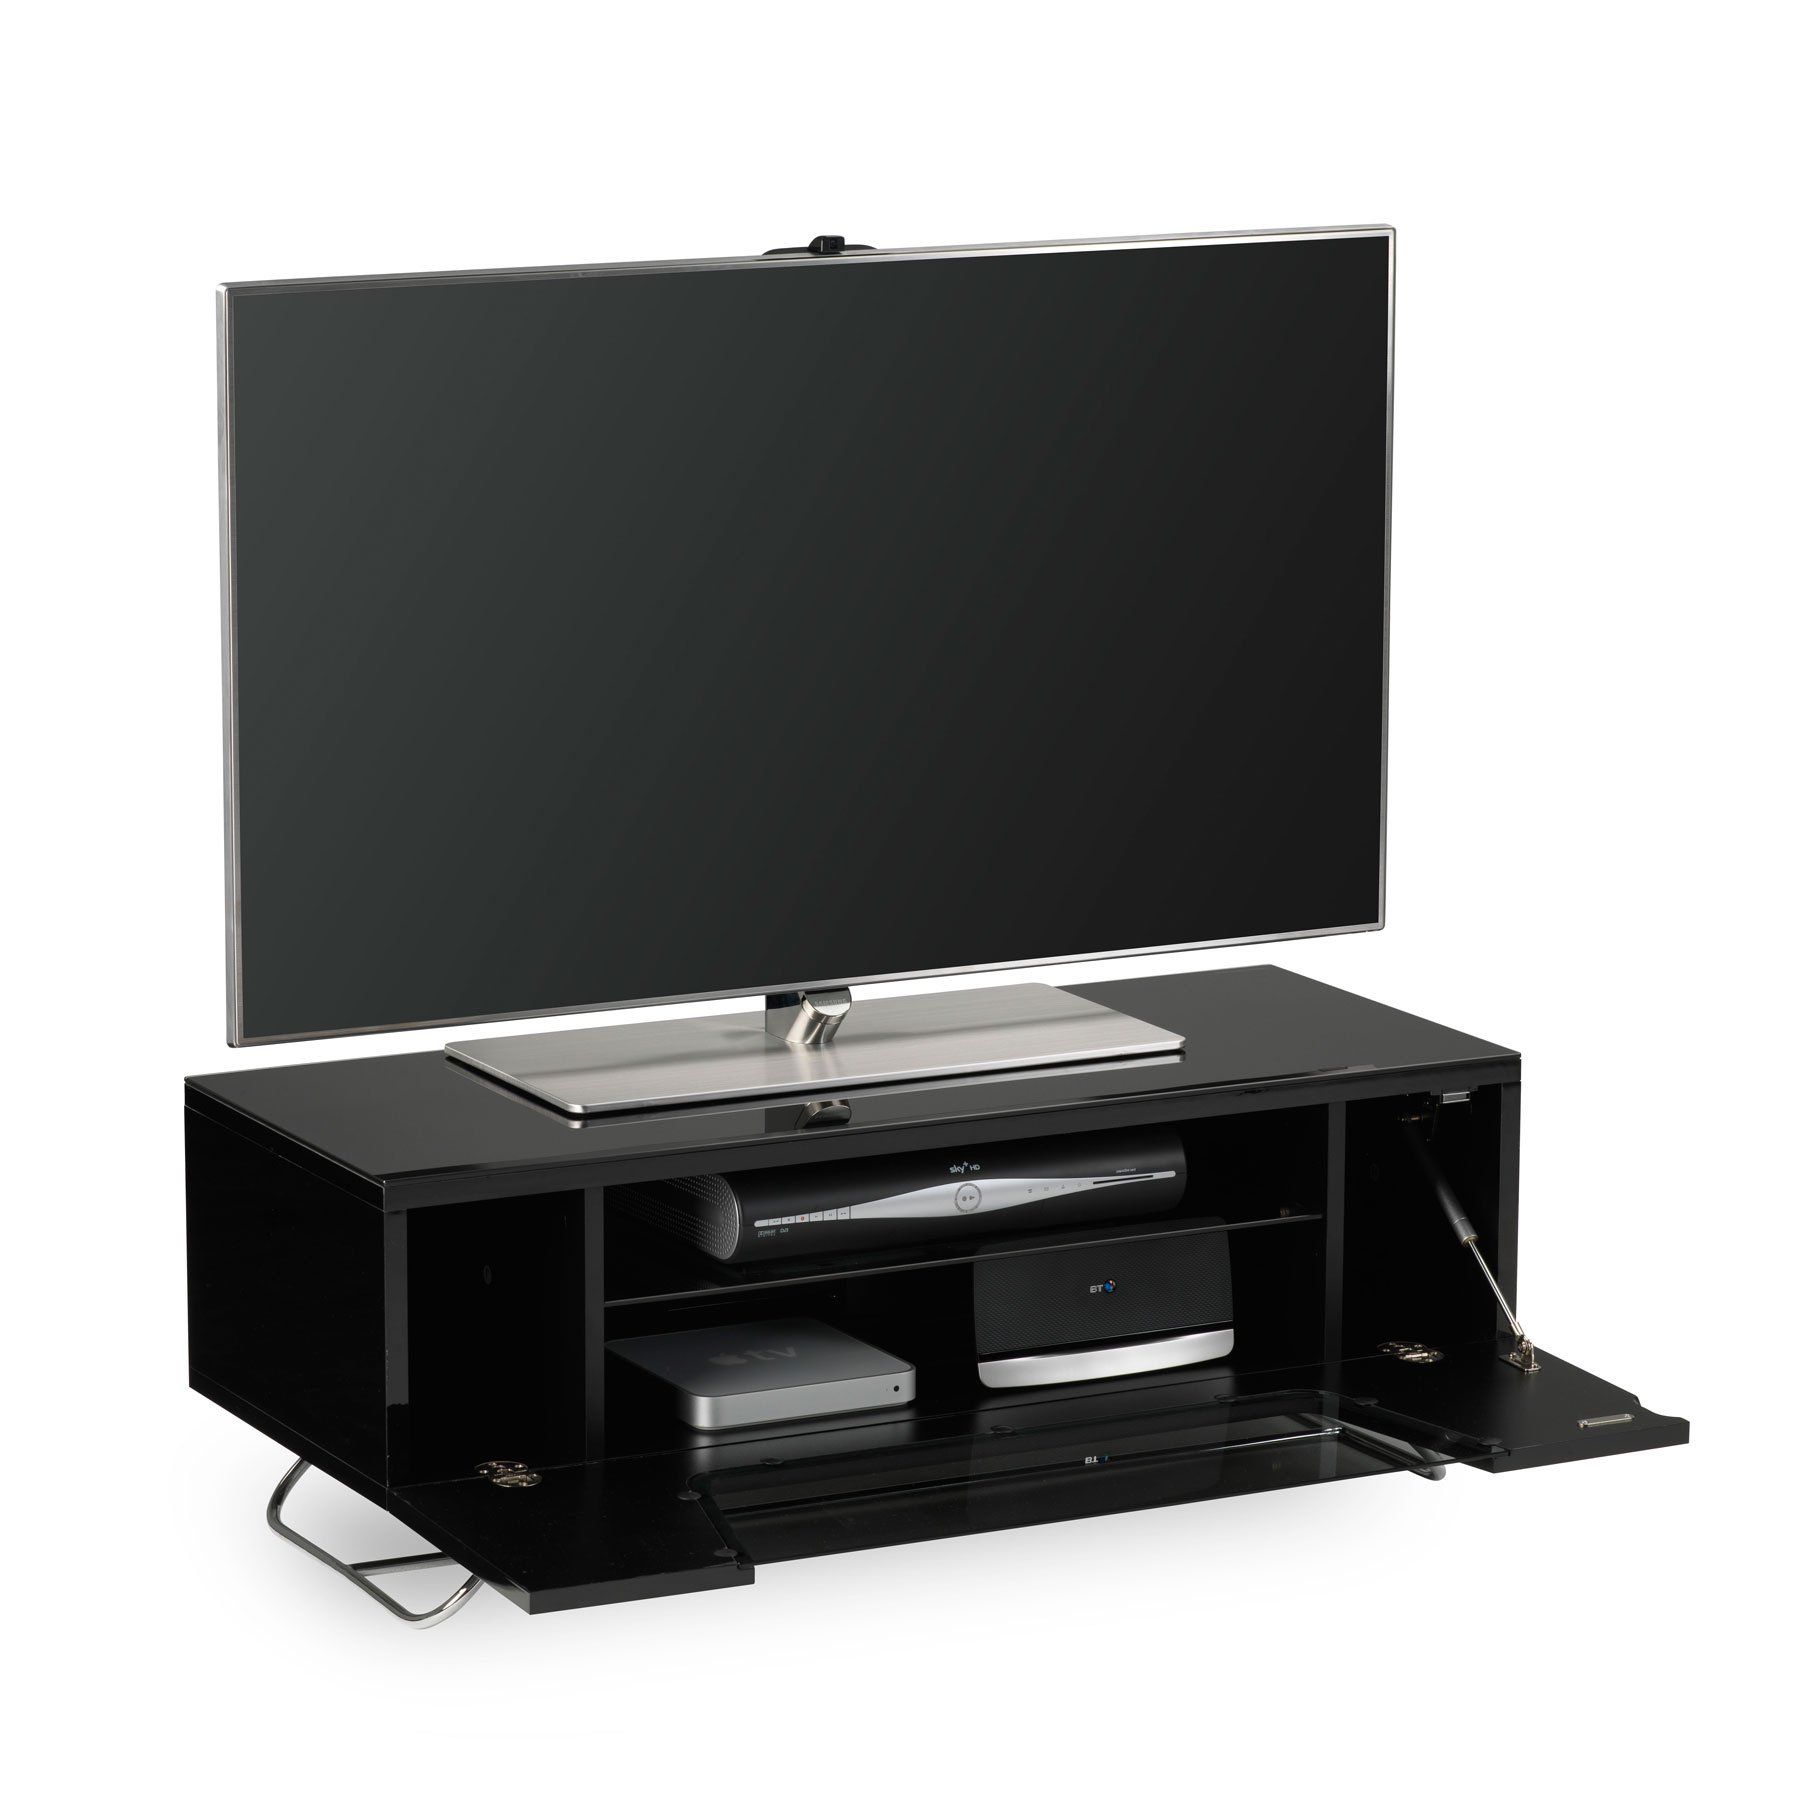 Alphason Chromium 2 100cm Black Tv Stand For Up To 50" Tvs With Regard To Mclelland Tv Stands For Tvs Up To 50&quot; (View 15 of 15)